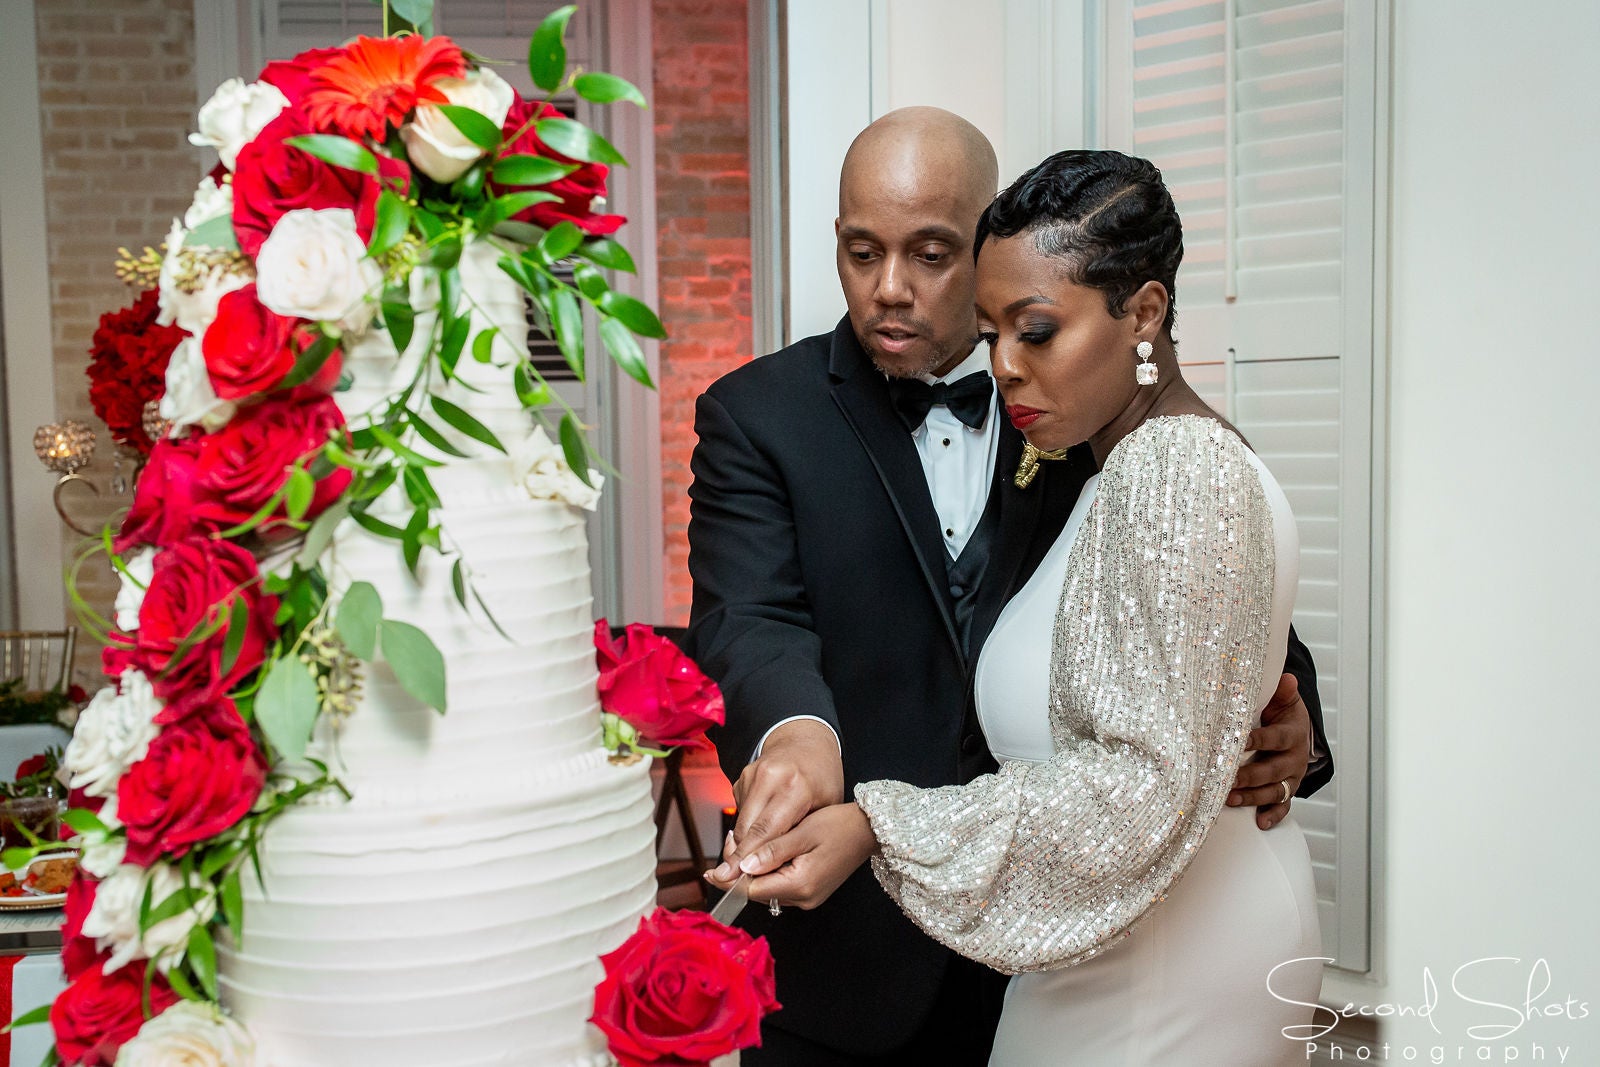 Bridal Bliss: The Roses Were Oh So Red At Krystal And Billy's Romantic Texas Wedding